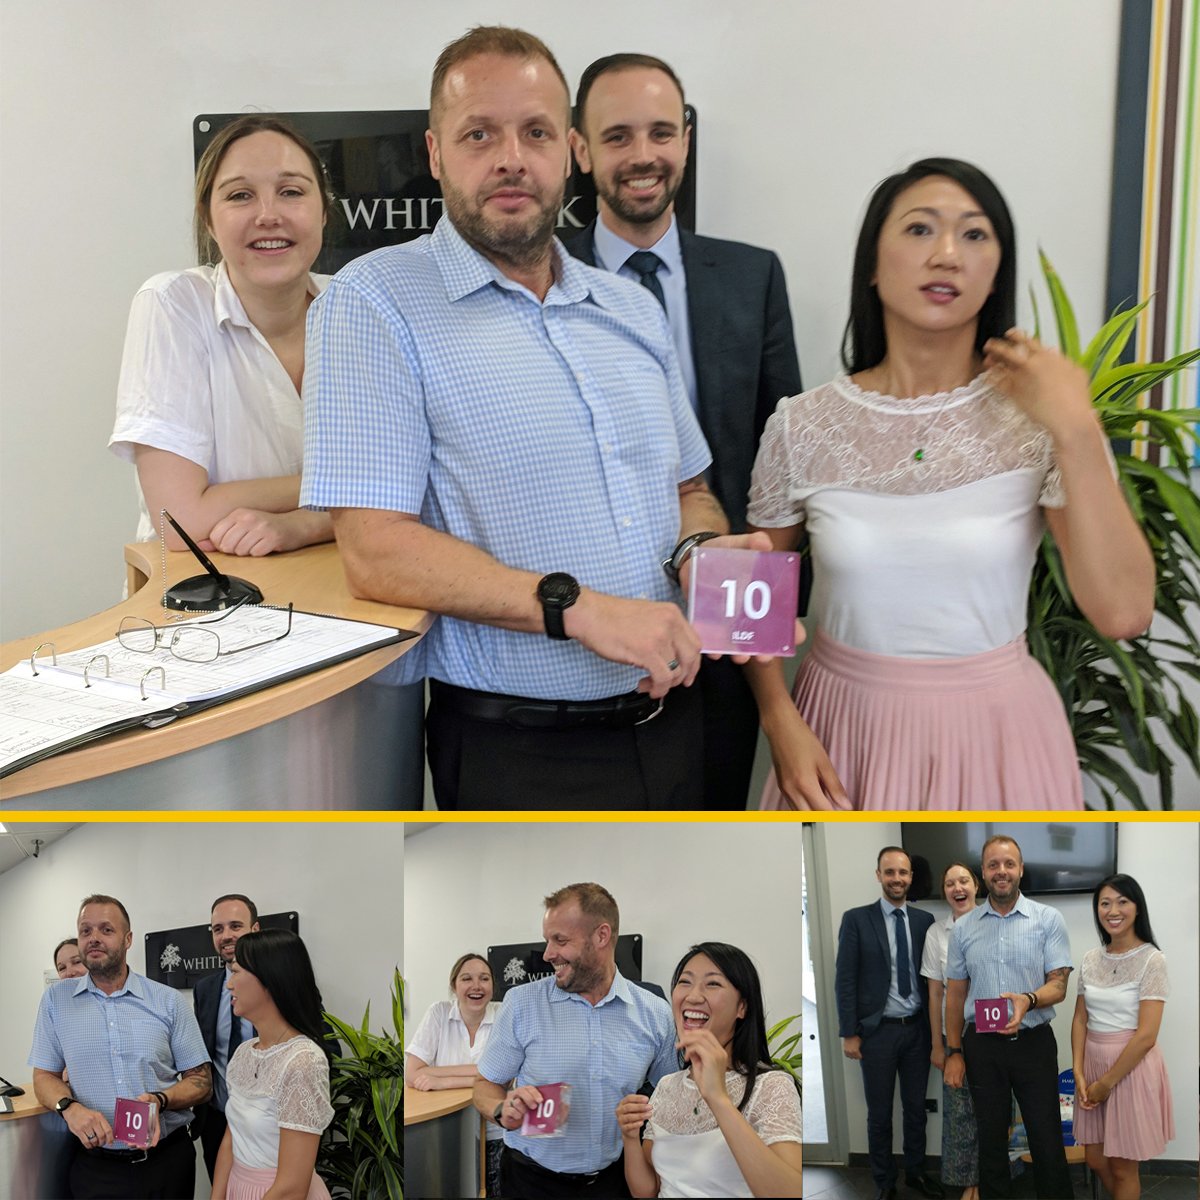 Meet Alison, Andrew, Mike & Sue-Ting who have all been presented with 10-years' service recognition awards. We're huge fans of our employees and it shows, as our average length of service is over 5 years! #employeeengagement #employeerecognition #servicequality #recognitionawards